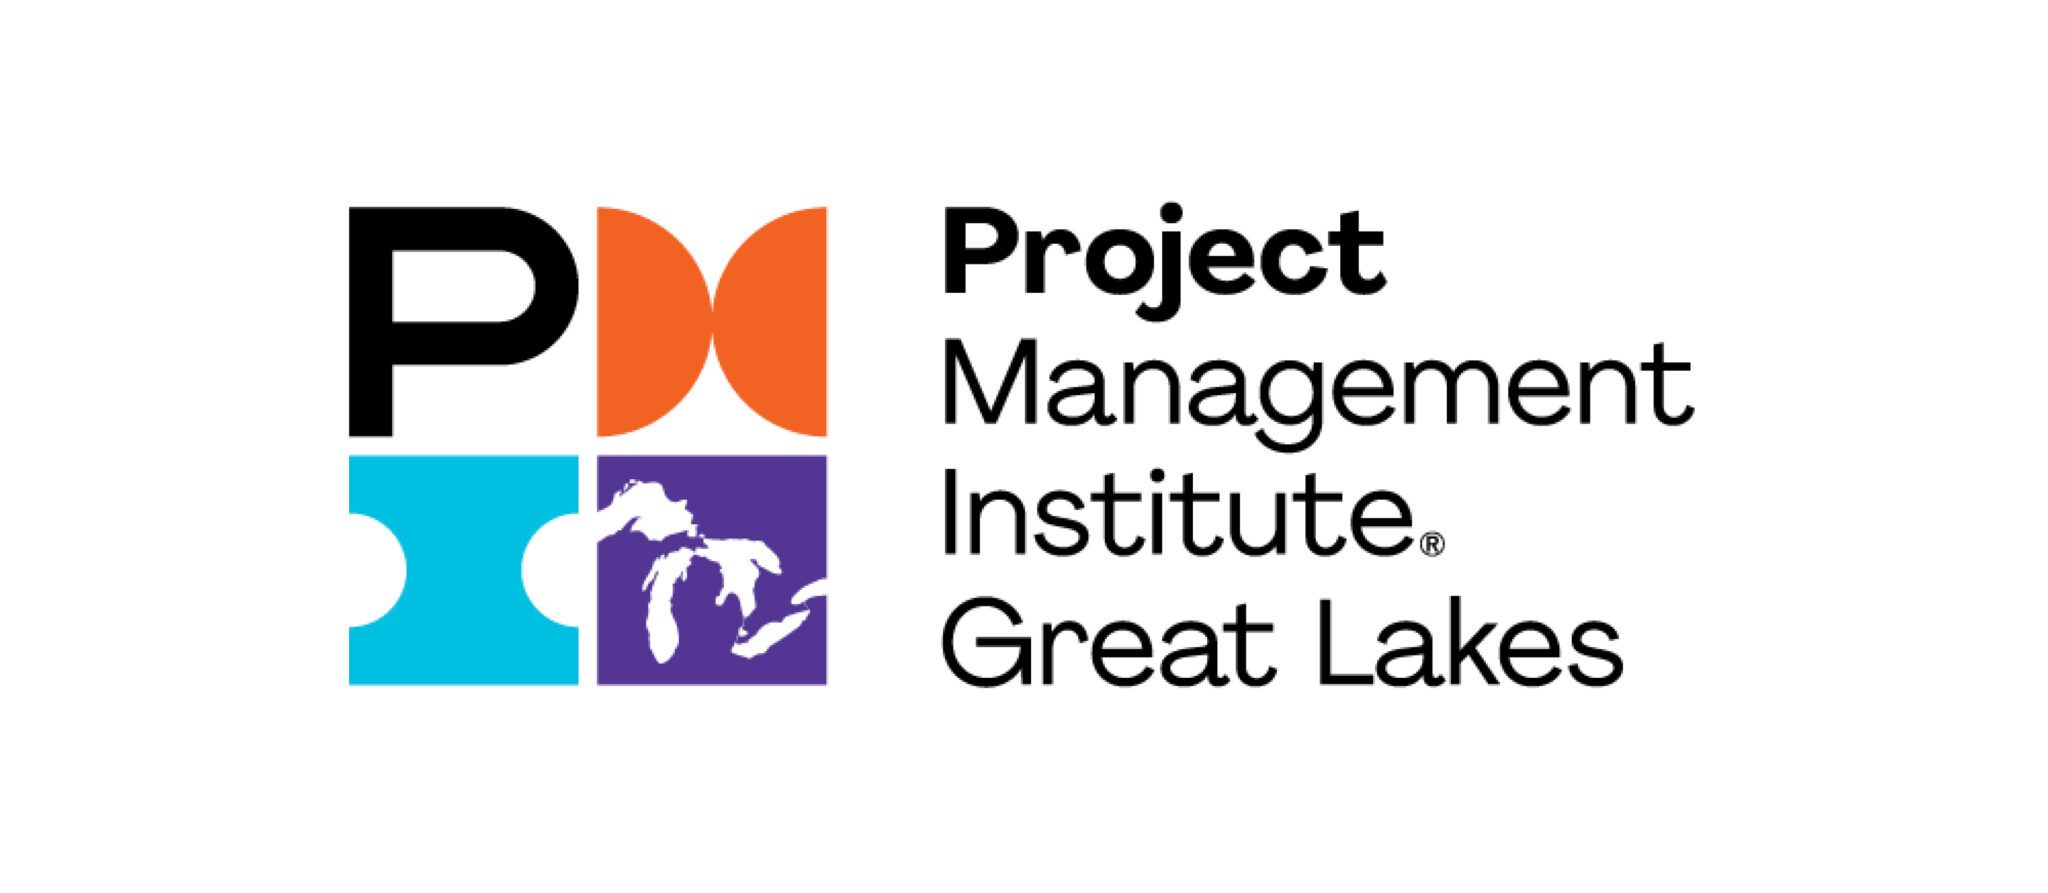 Project Management Institute Great Lakes Logo